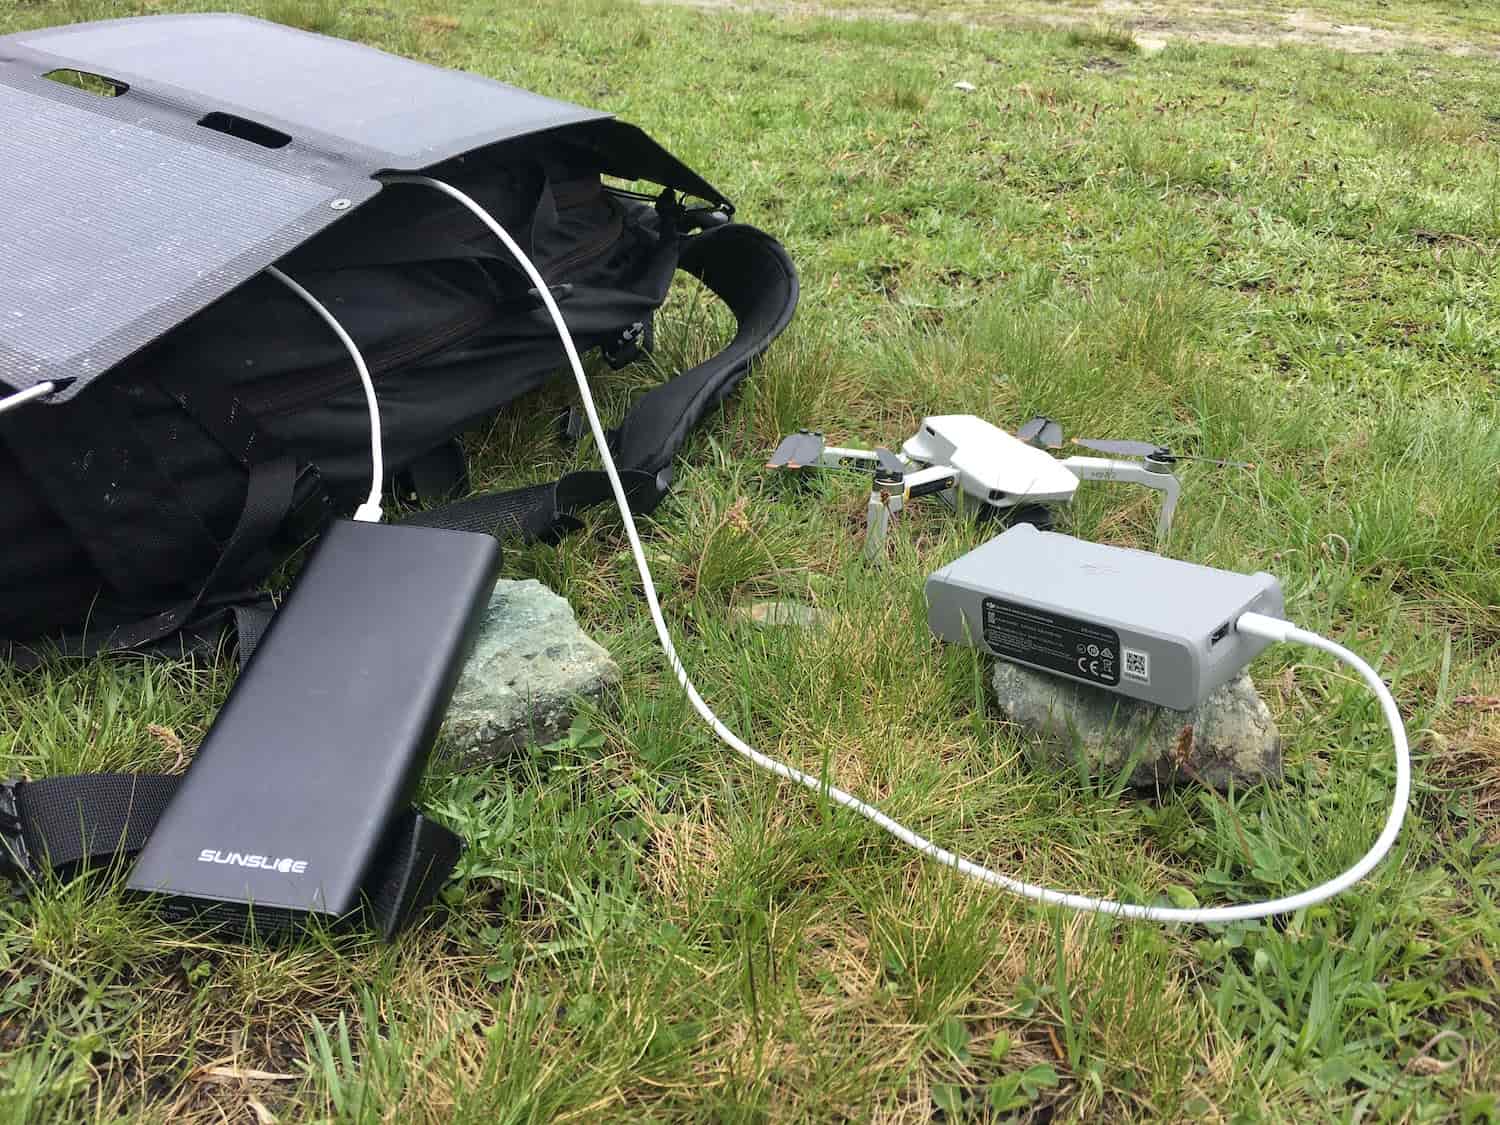 hiking solar panels in the sun charging a 100 watt hour power bank and a drone charger